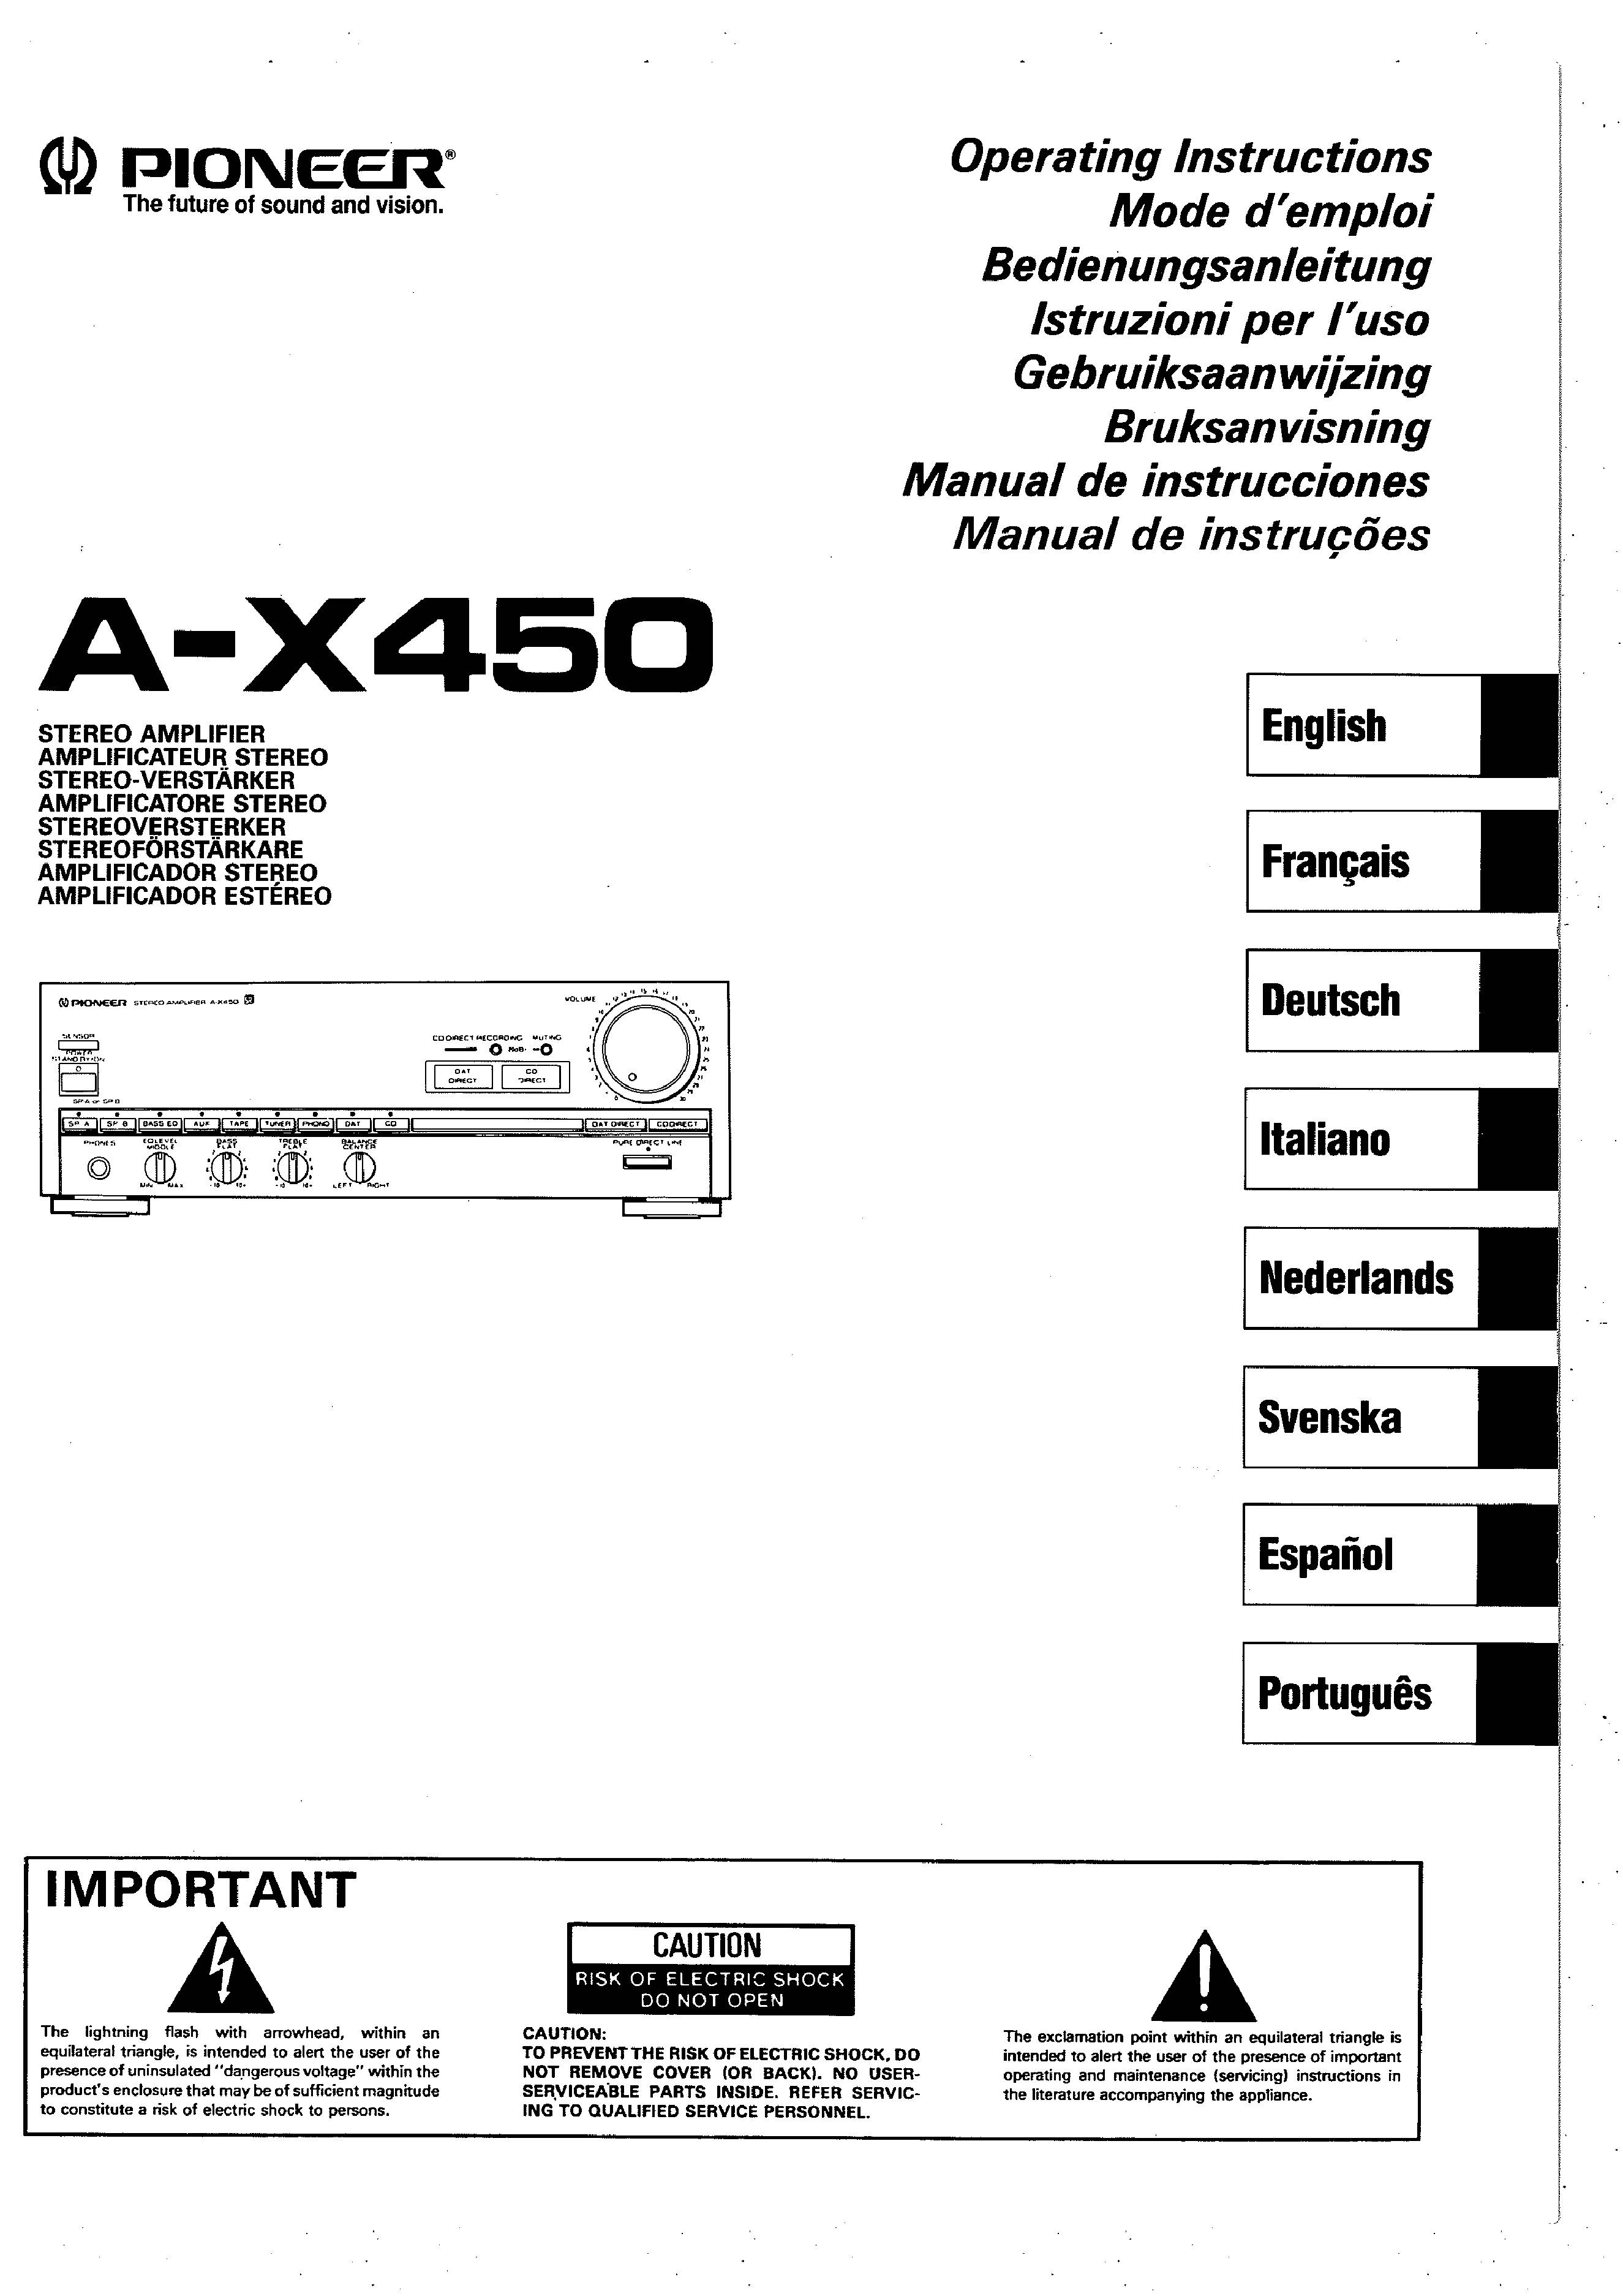 Pioneer A-X450